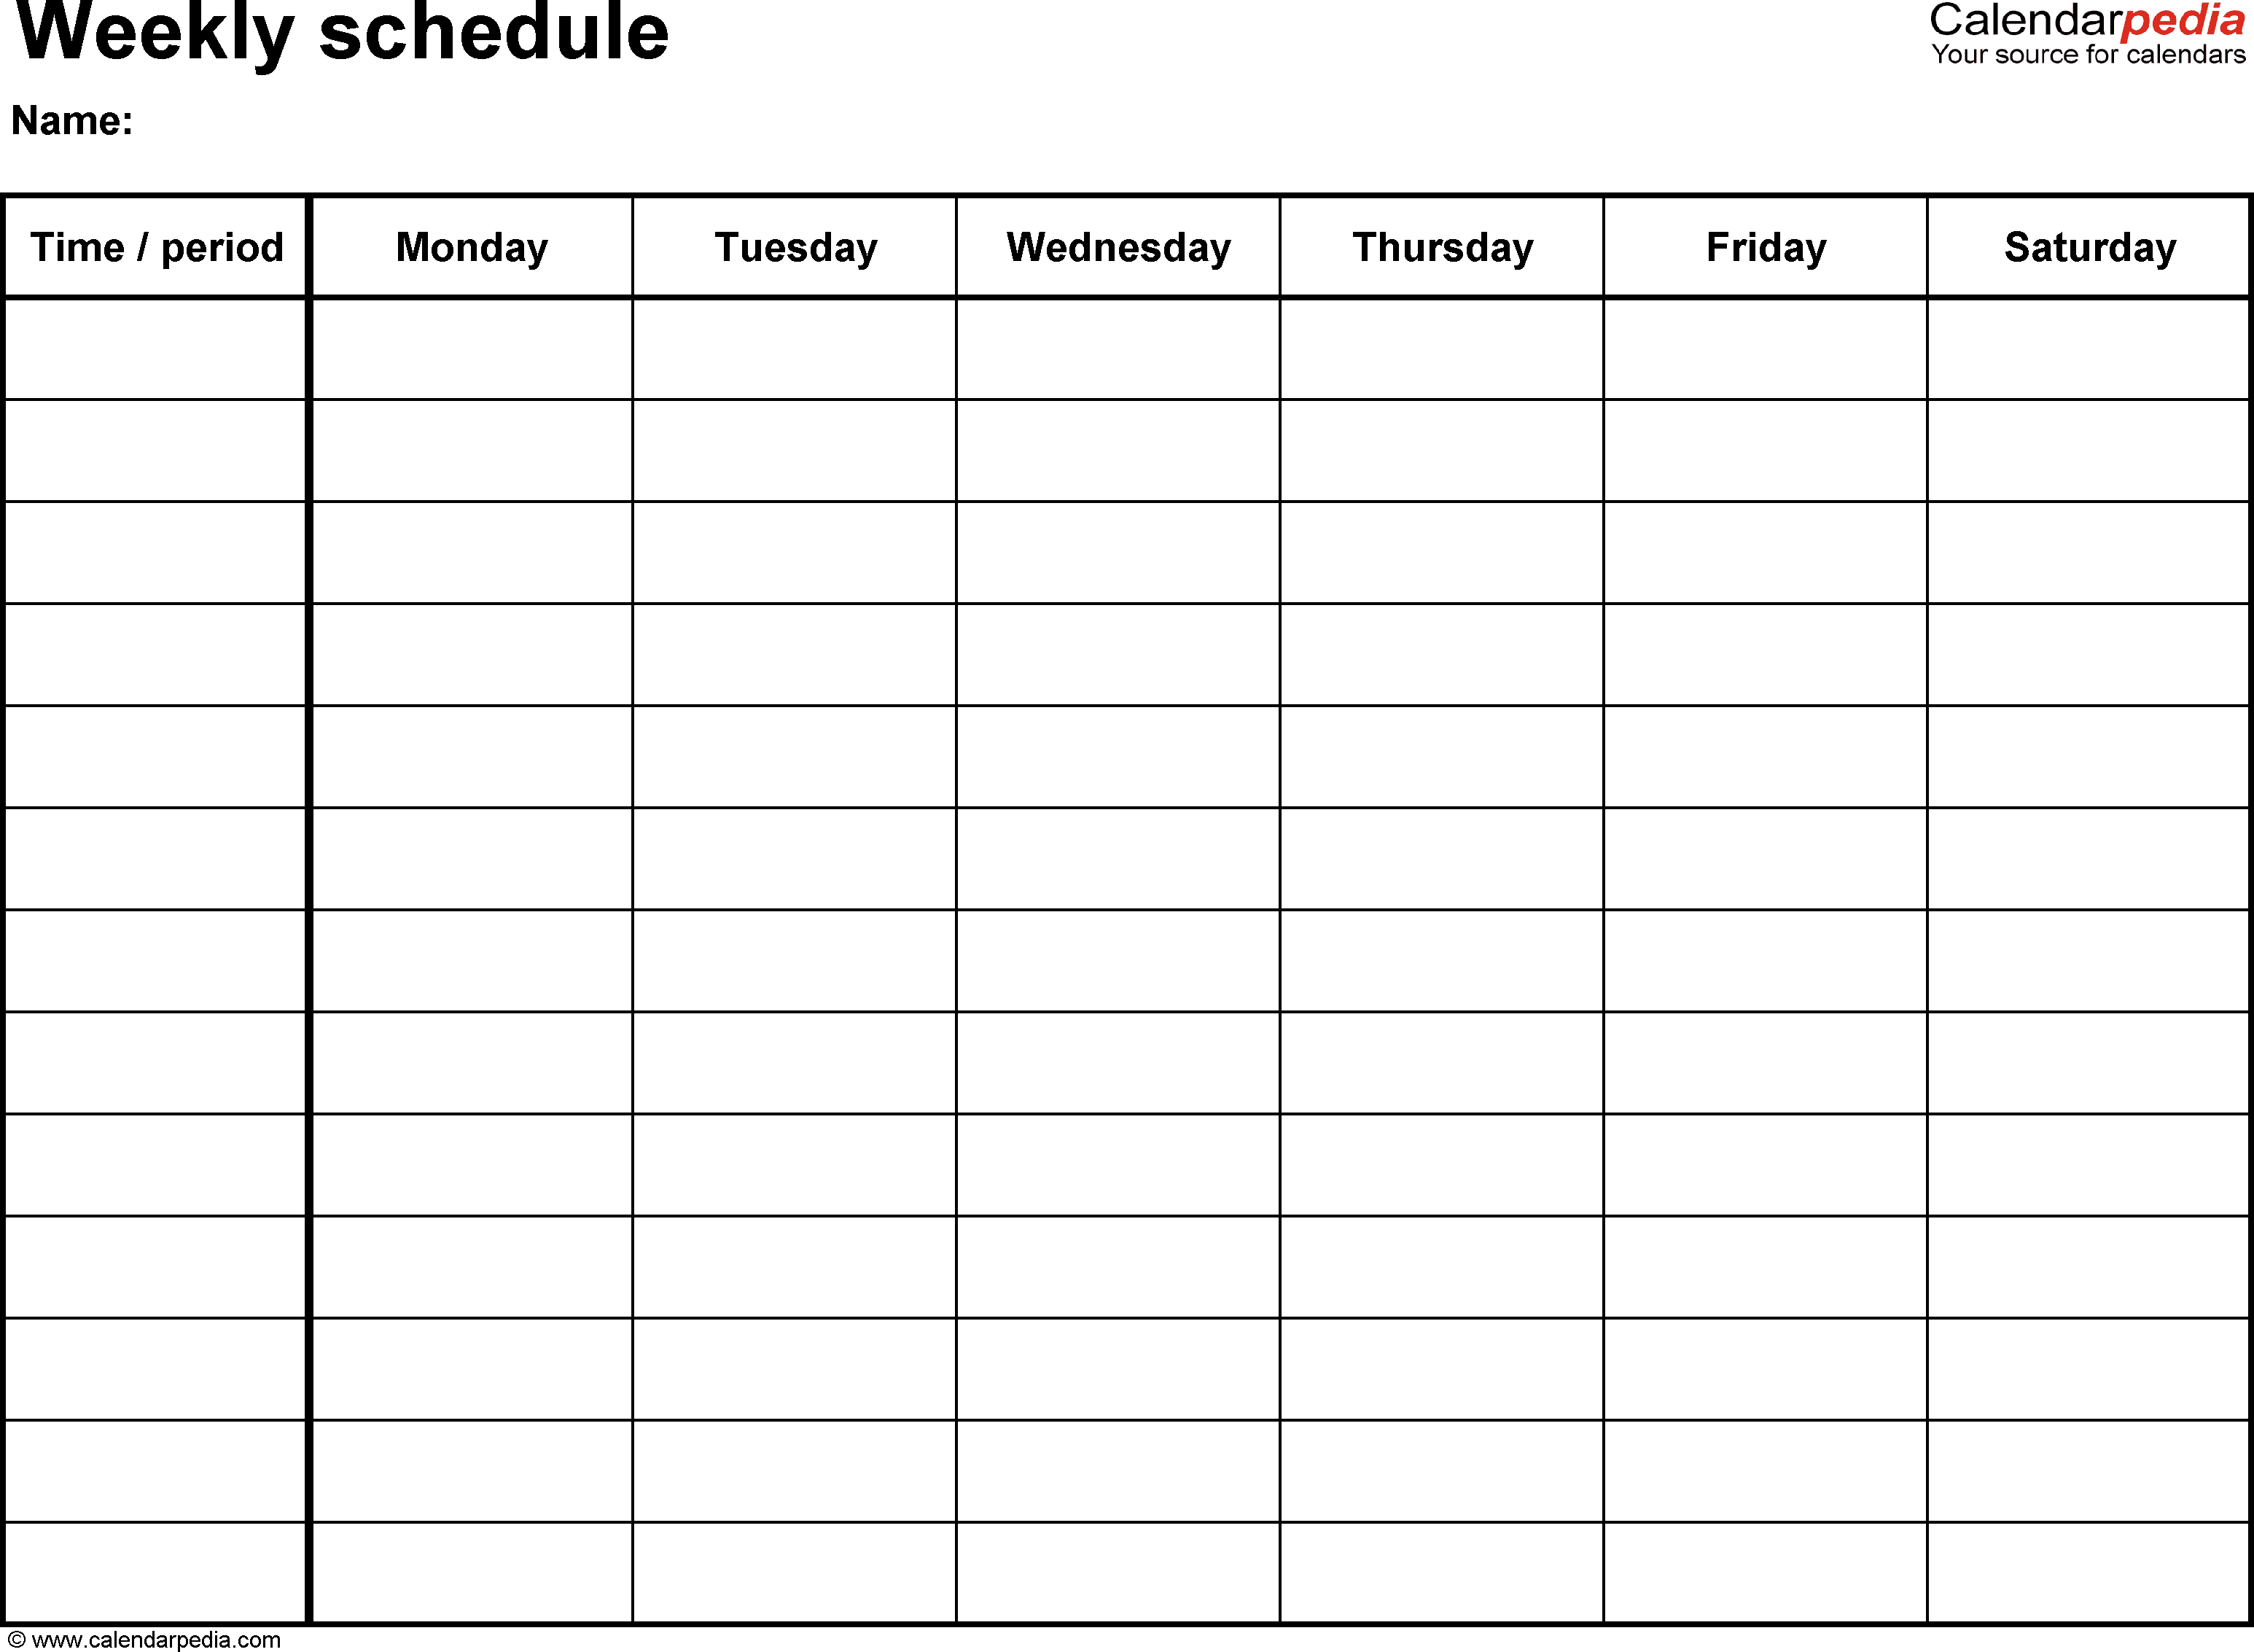 Free Weekly Schedule Templates For Word - 18 Templates inside Employee Schedule Templates